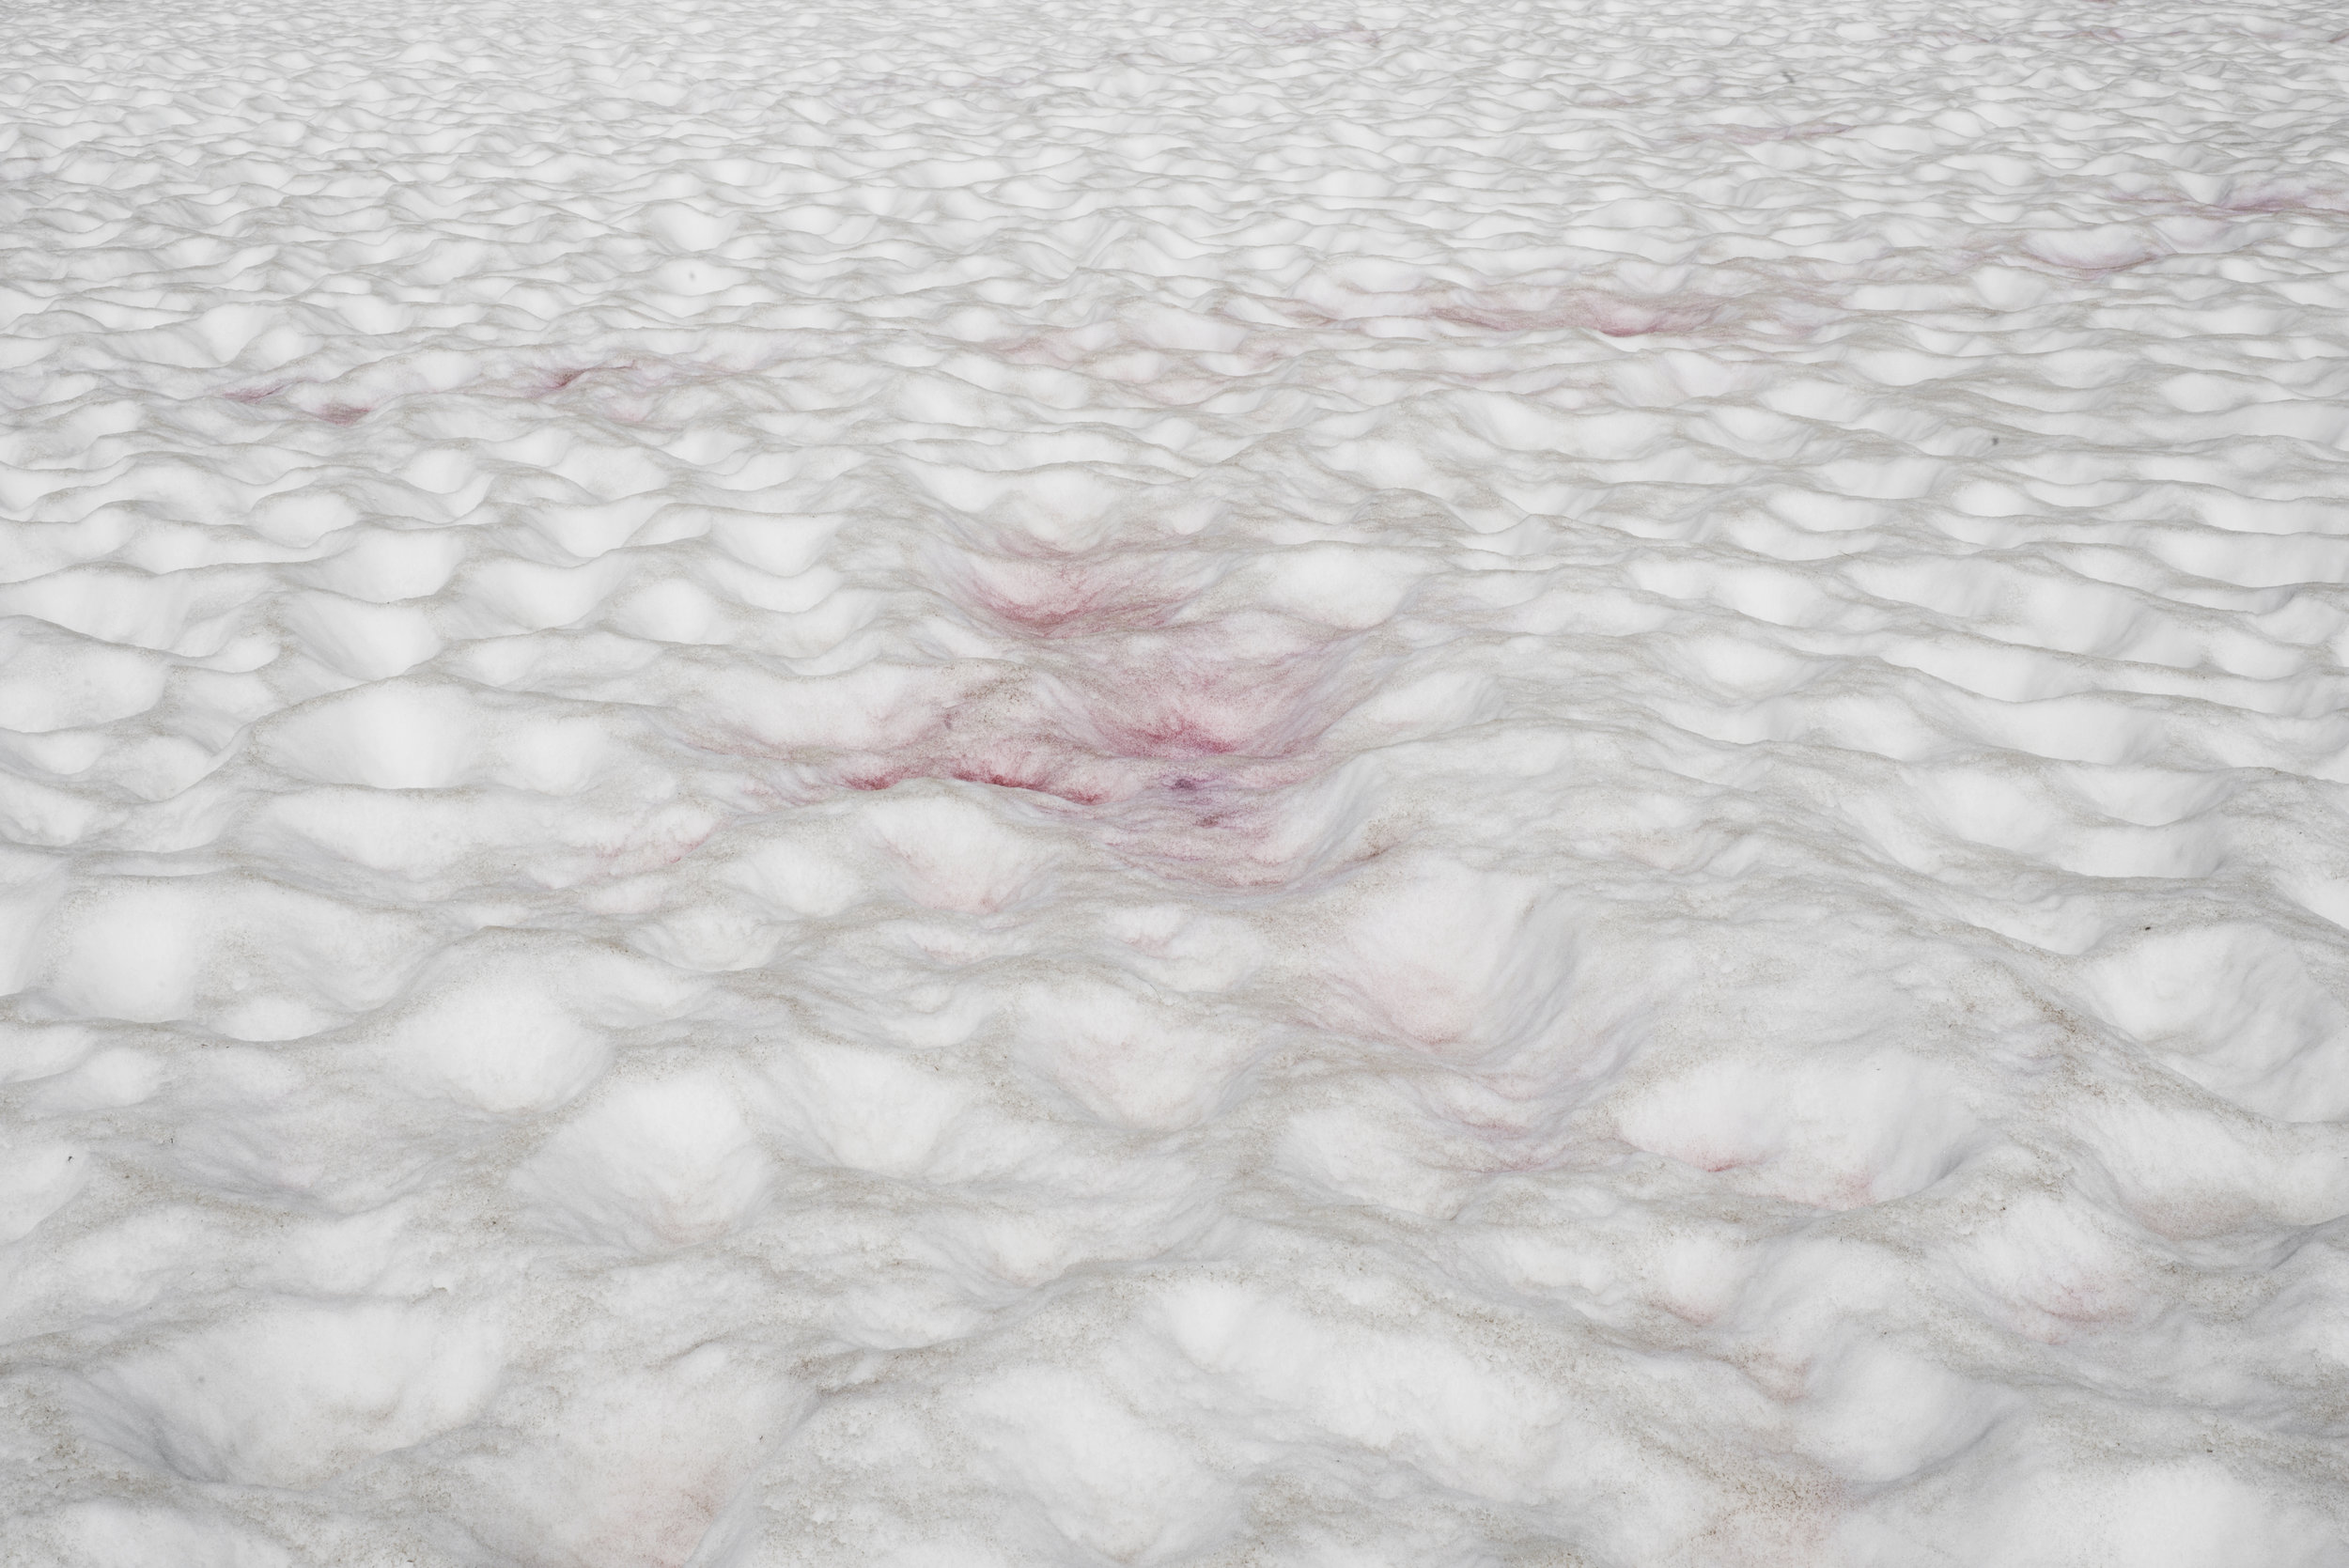 pink snow at the continental divide